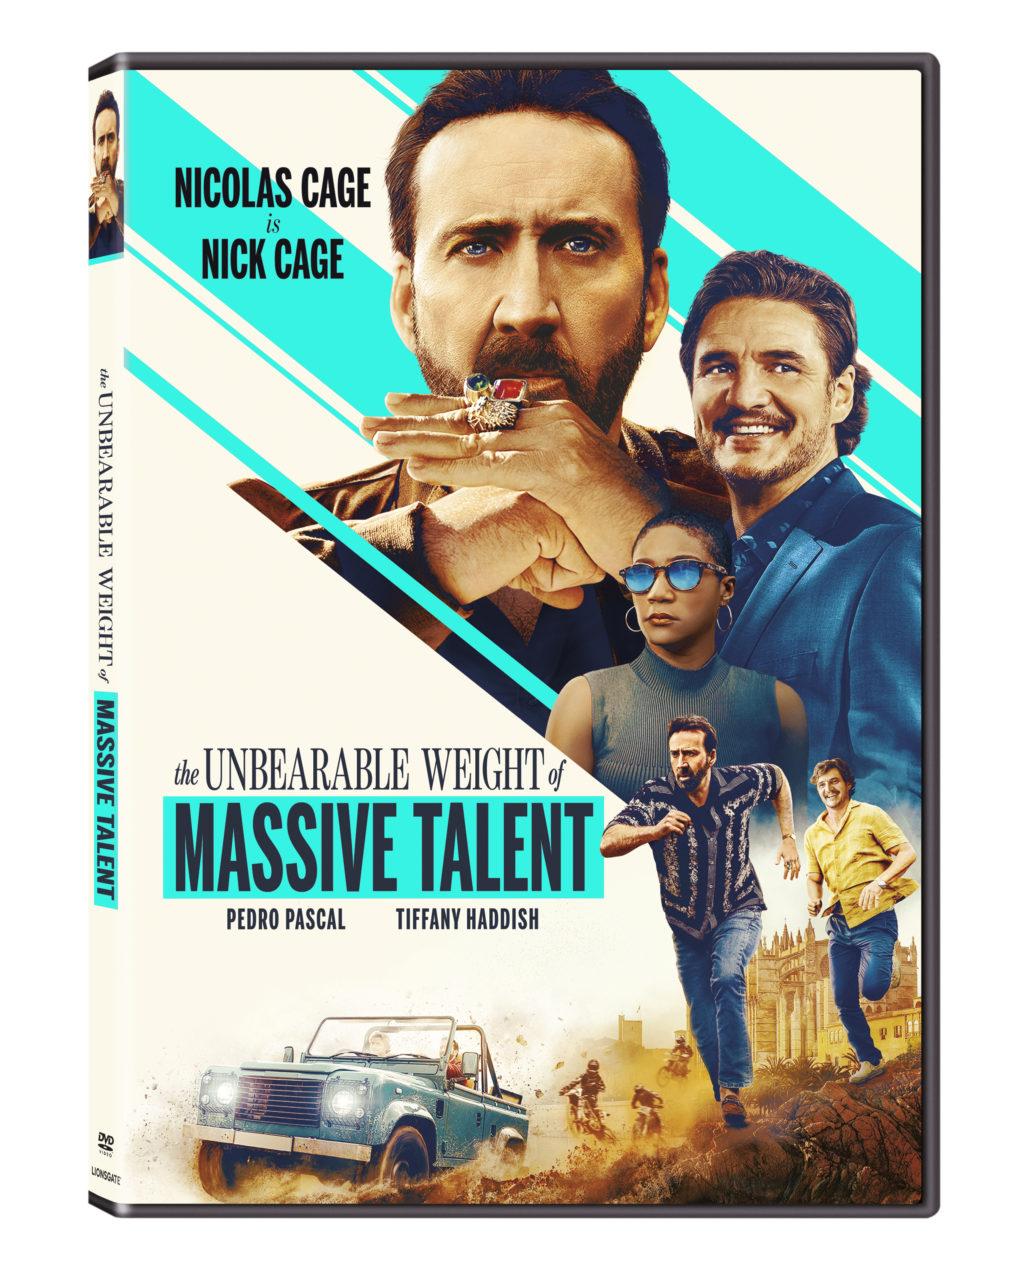 The Unbearable Weight Of Massive Talent DVD cover (Lionsgate)